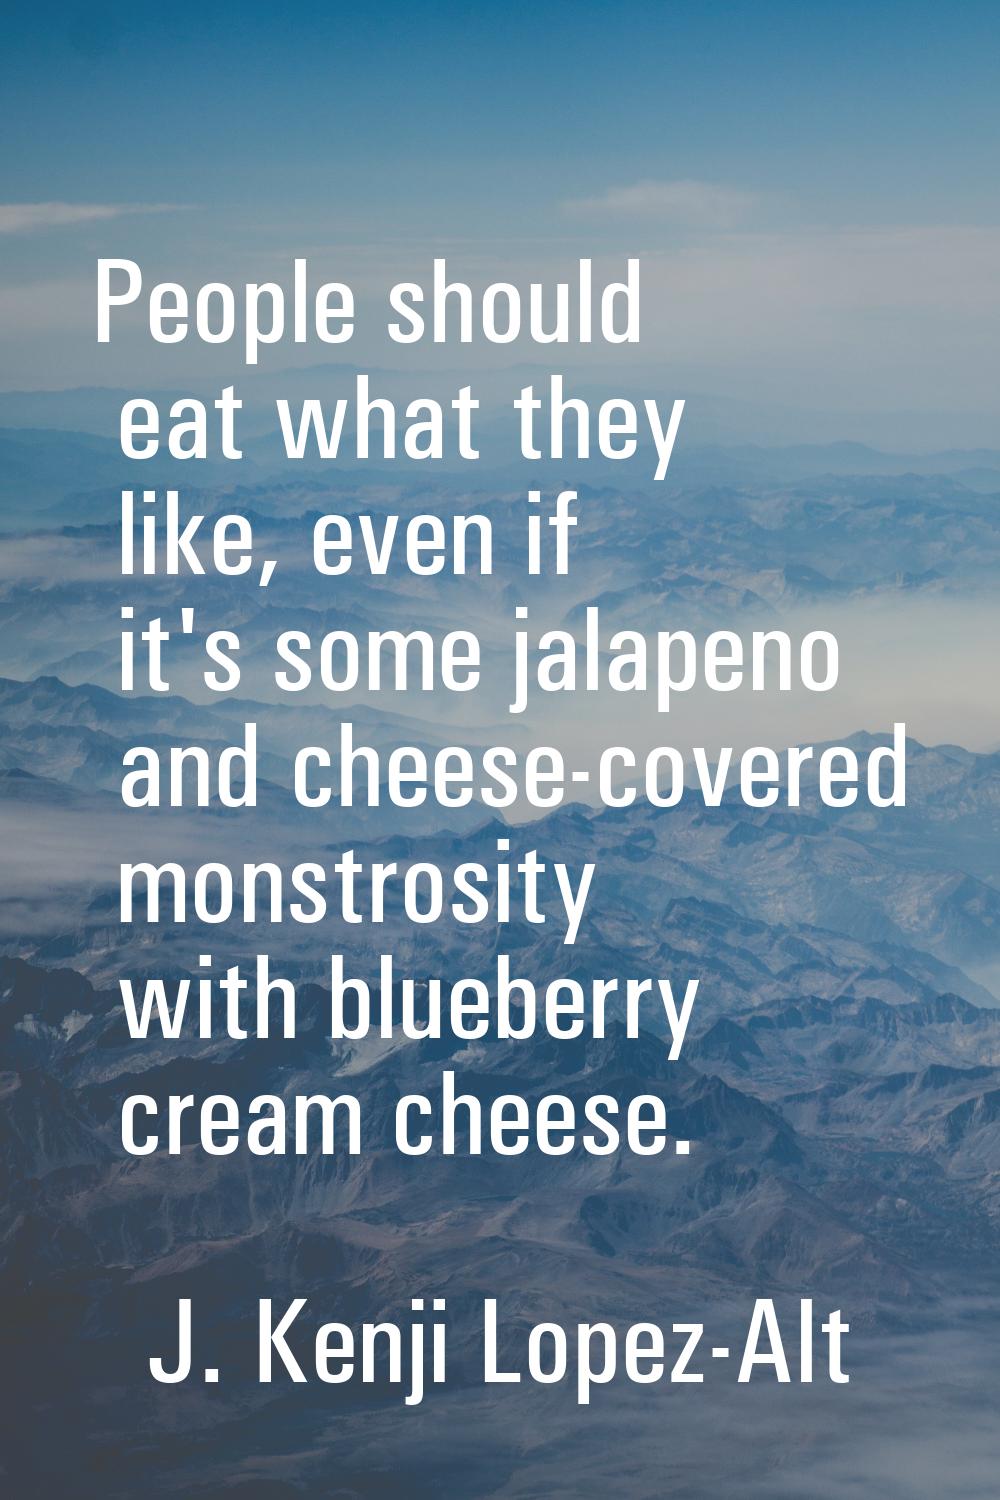 People should eat what they like, even if it's some jalapeno and cheese-covered monstrosity with bl